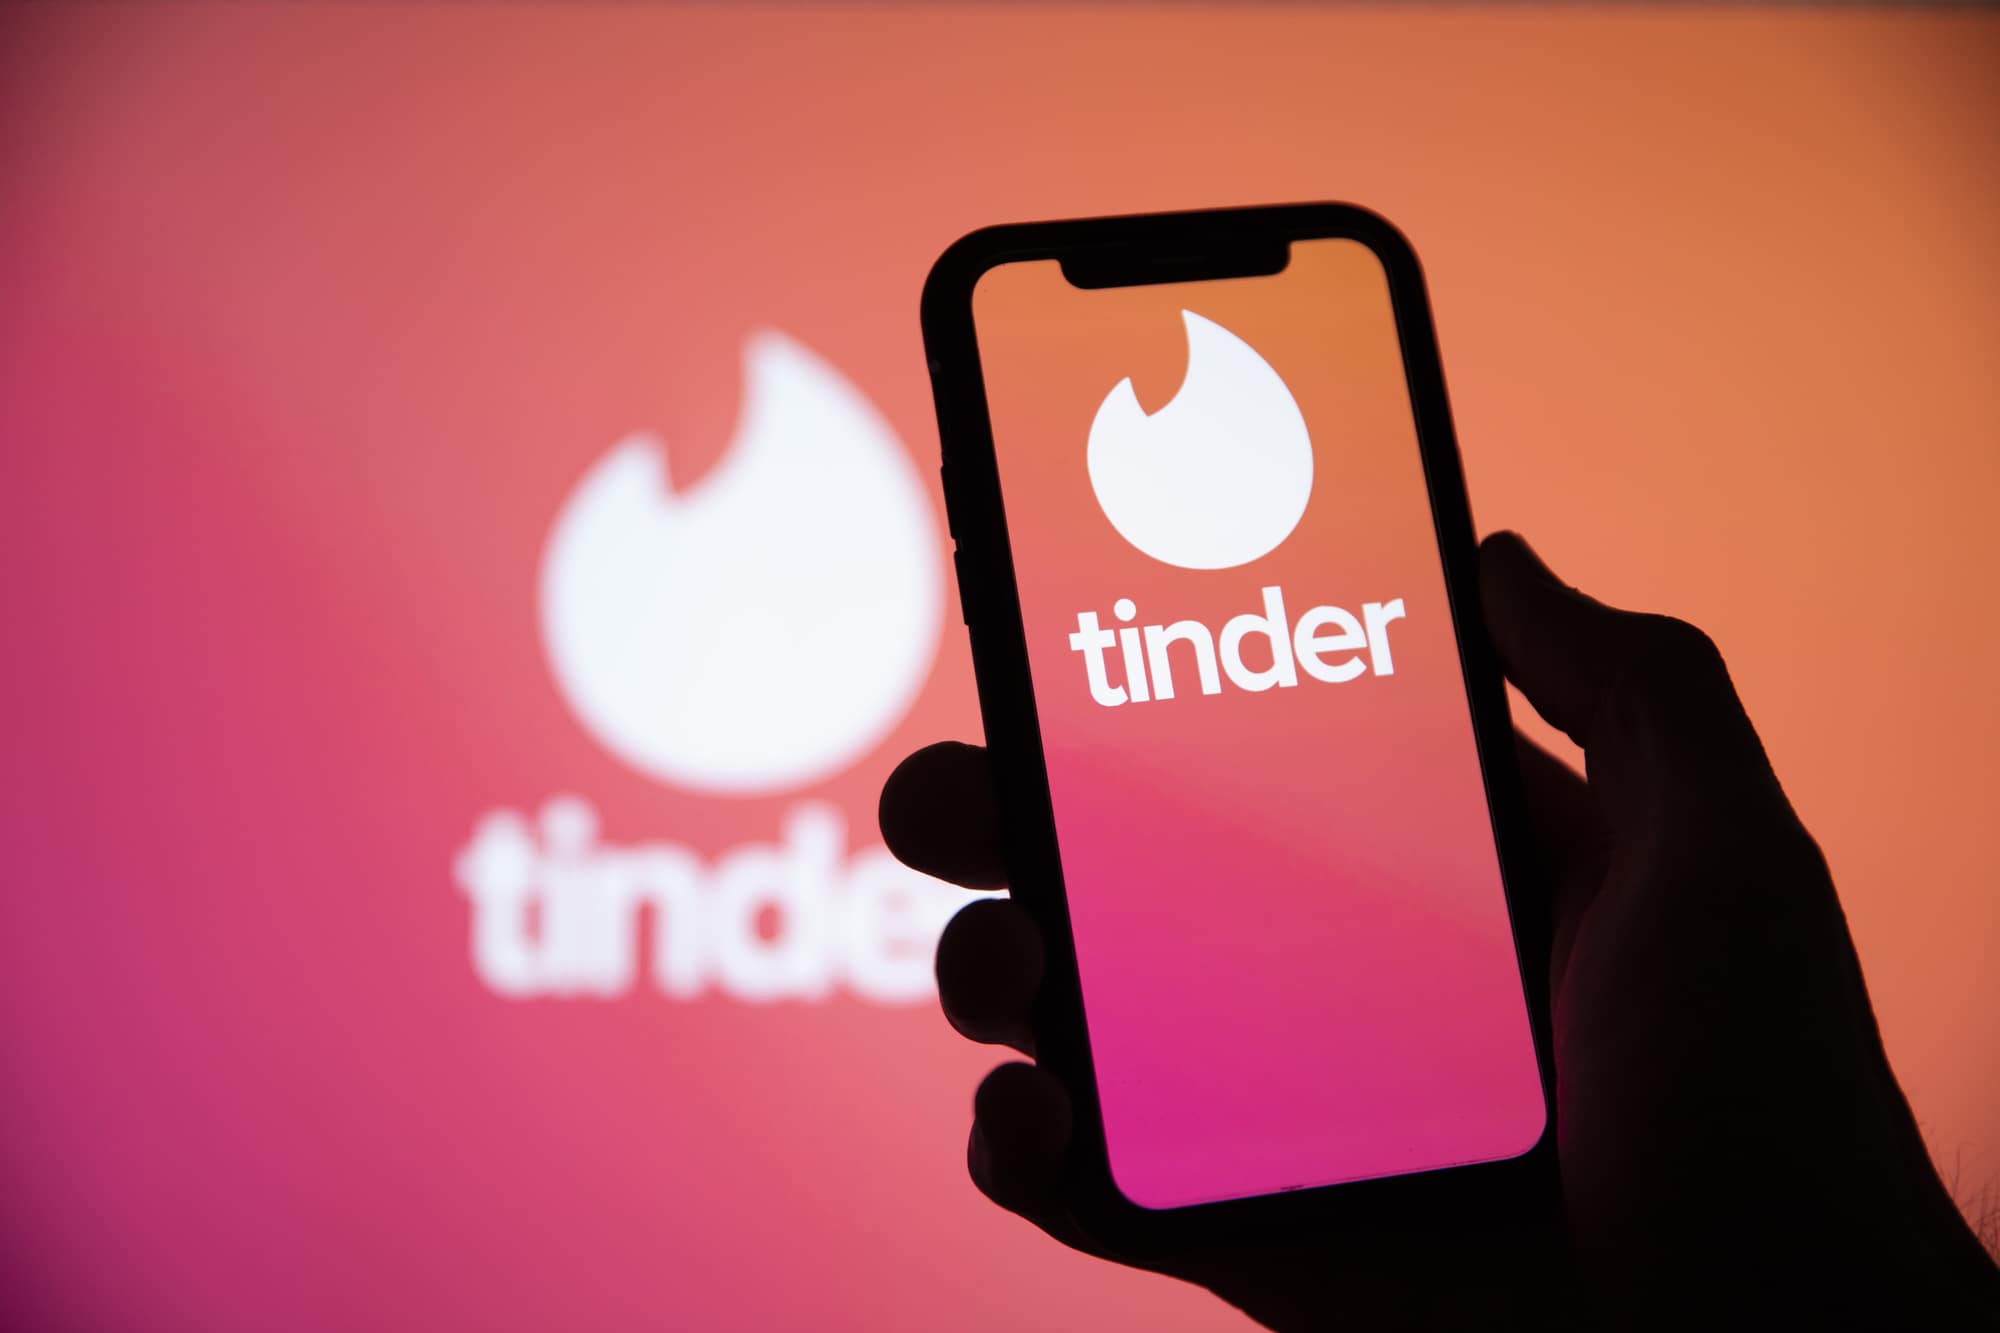 Does double check mark mean it's been read? Or would it say read? : r/Tinder